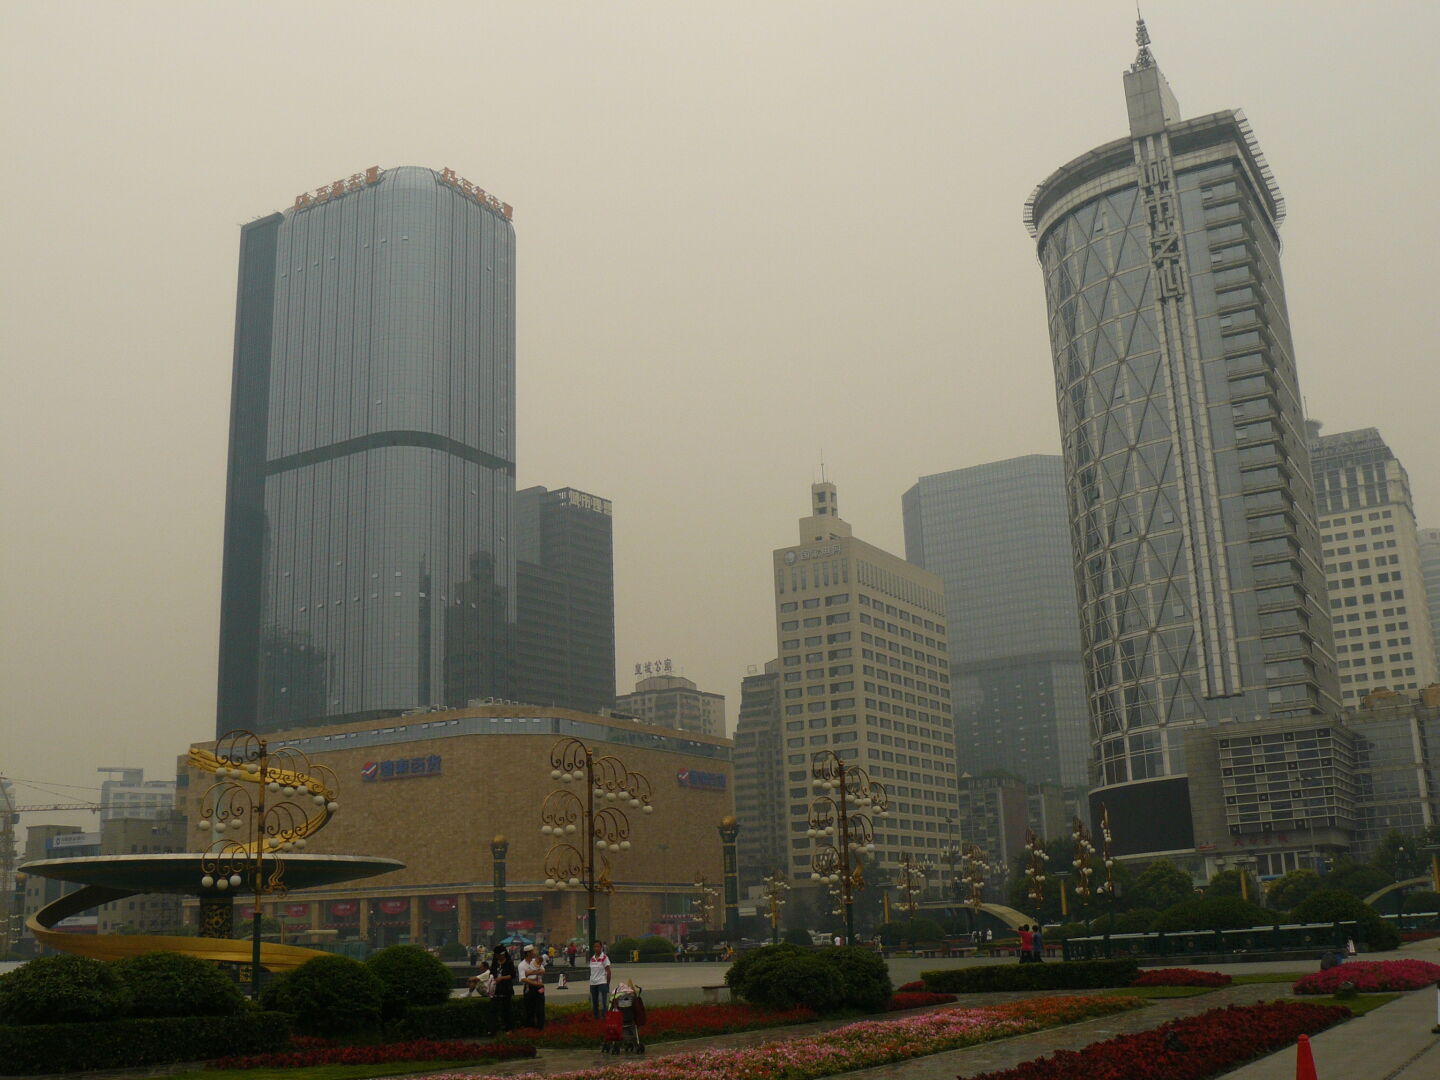 It is a pity that the haze prevented me from seeing the tops of the skyscrapers clearly.